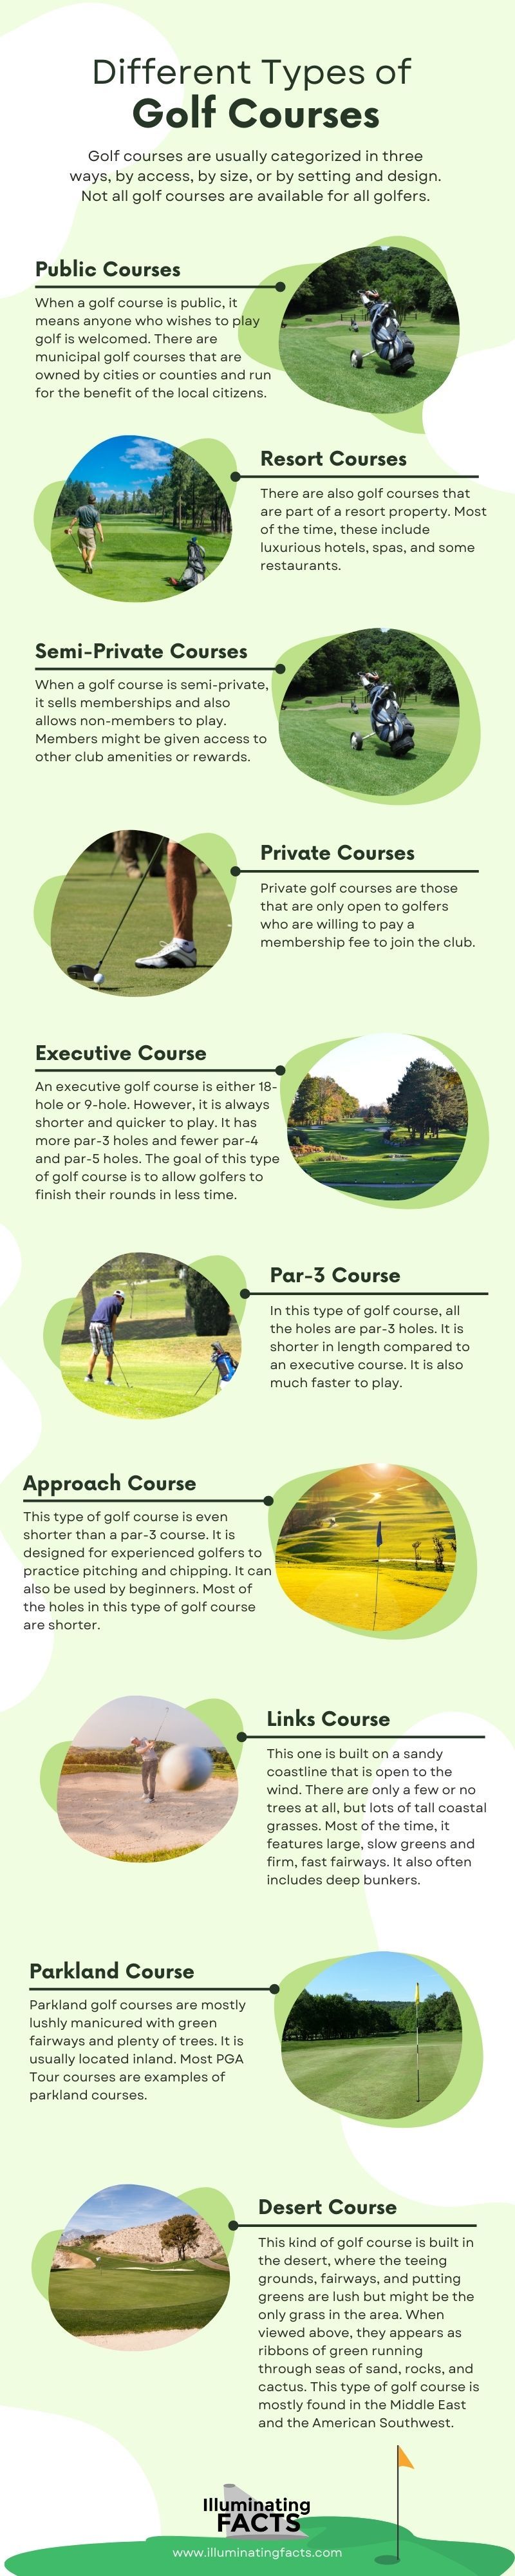 Different Types of Golf Courses